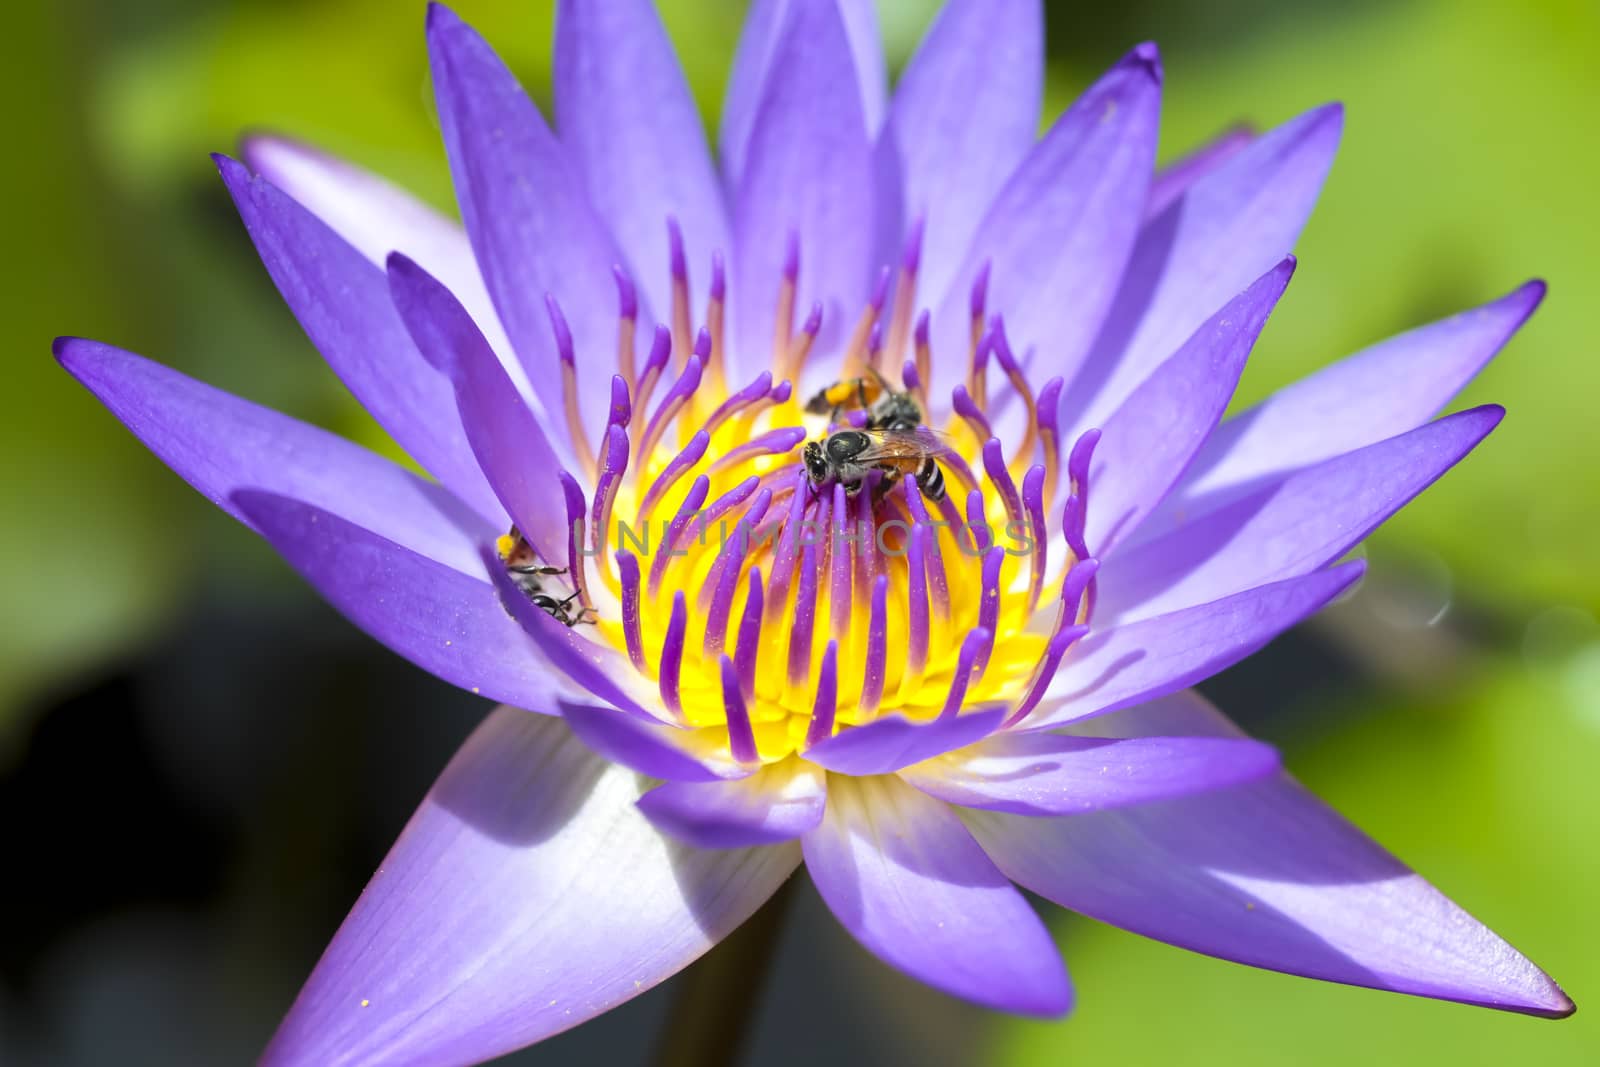 Lotus flower and  bee by Chattranusorn09